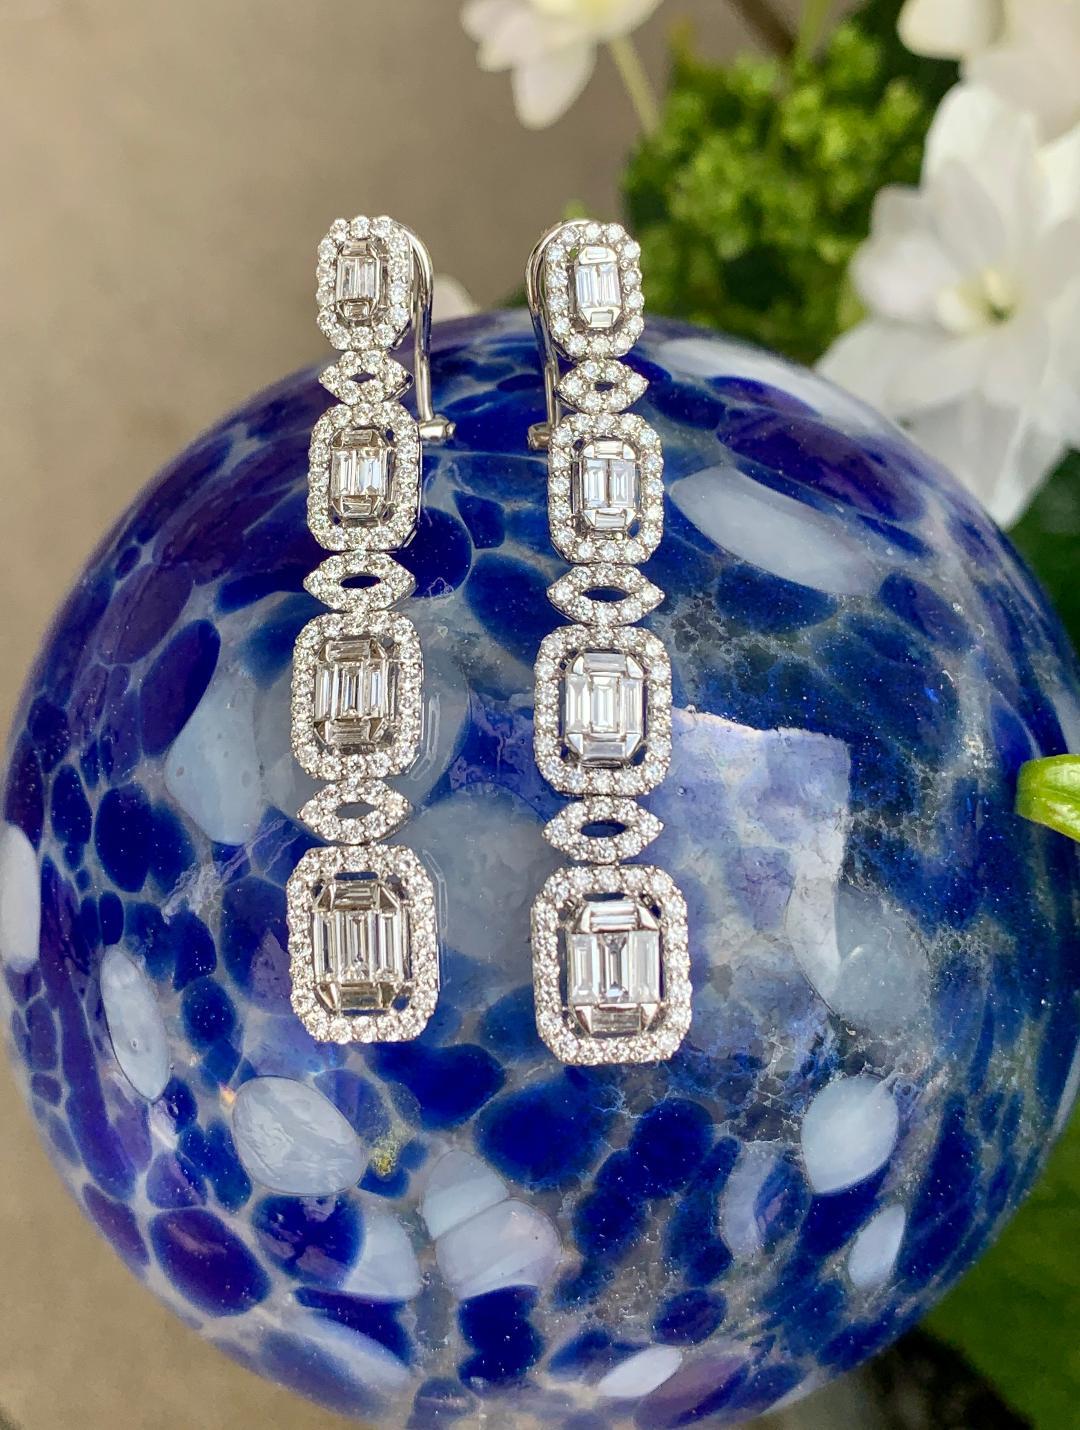 Beautiful pair of 18 karat white gold Art Deco style dangling earrings feature invisibly set baguette diamonds which give the illusion of a very large, cut cornered emerald cut diamond in the center of each tier. Each of the four emerald shaped